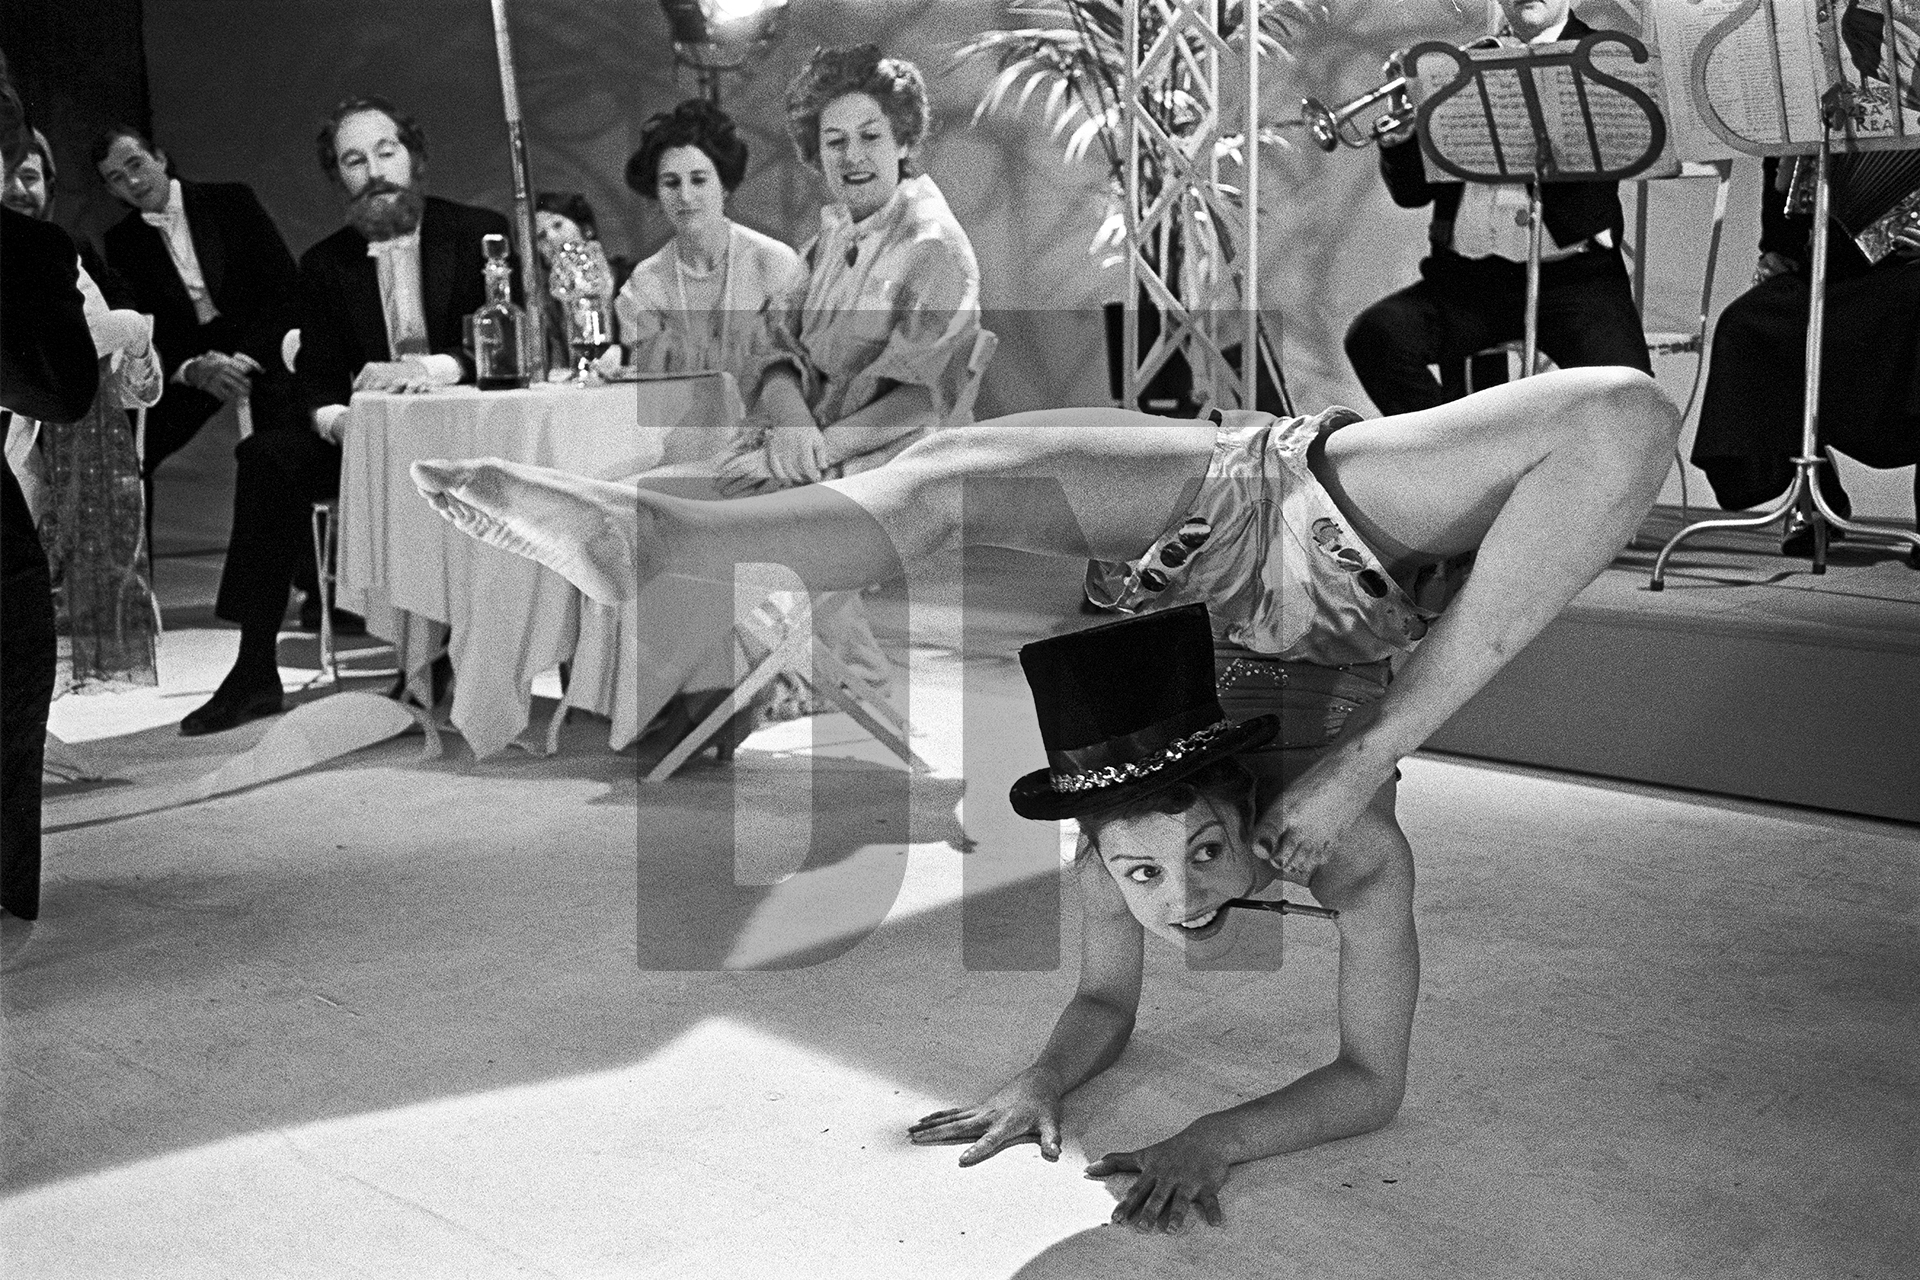 After dinner in Venice, travelling players entertain hotel guests. Location filming. Charing Cross Hotel, London. 15 June 1981 by Daniel Meadows